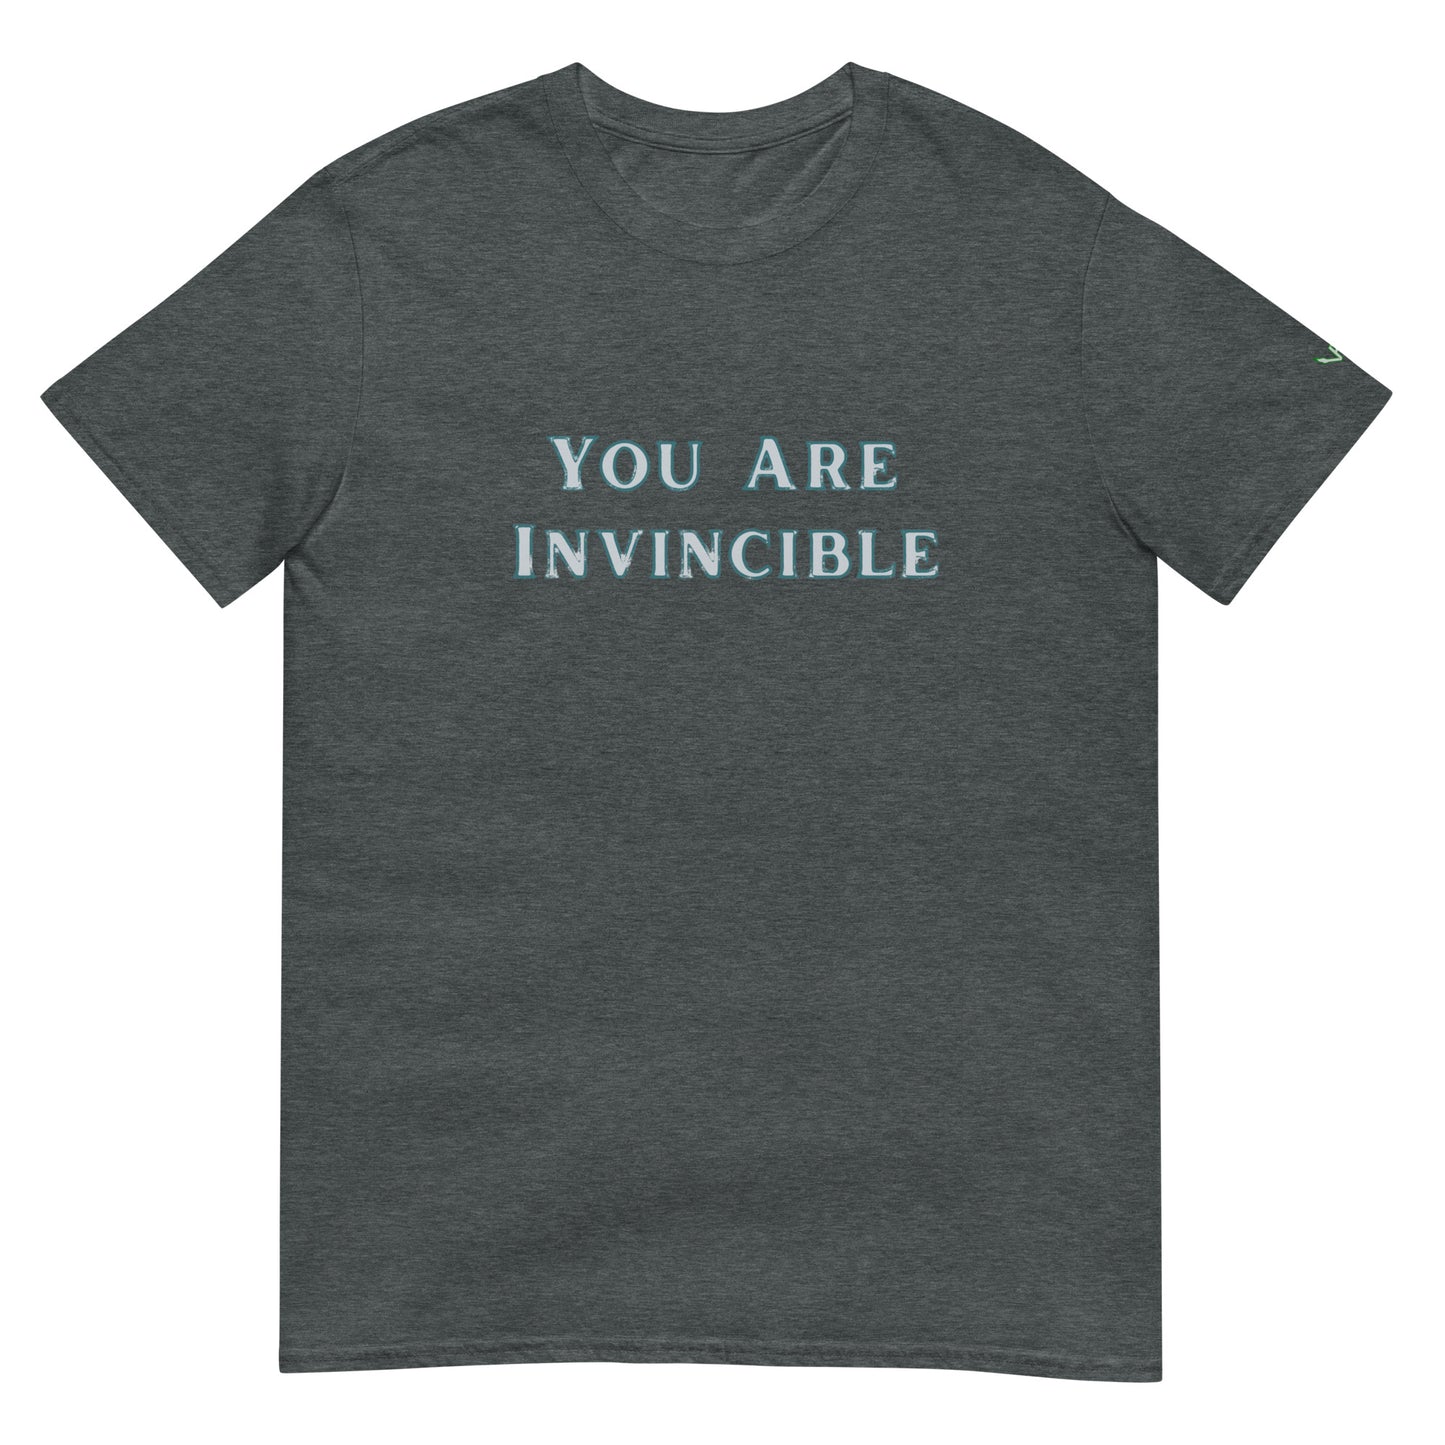 Vince Papale You Are Invincible T